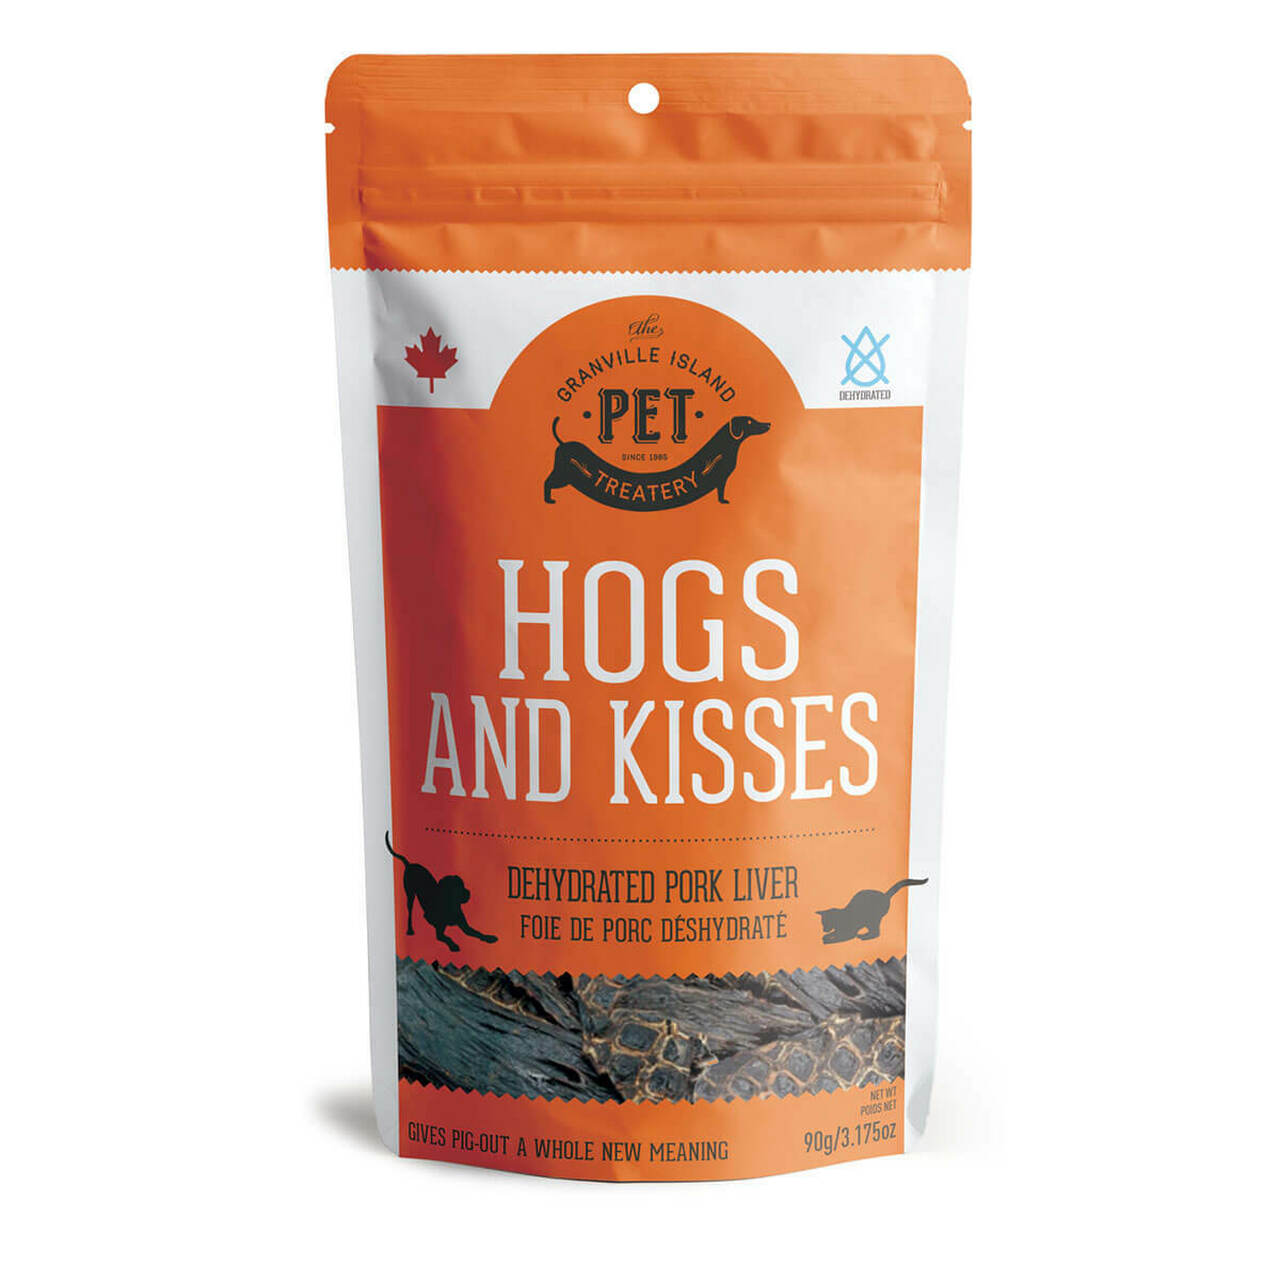 Granville Island Pet Treatery Hogs and Kisses Pork Liver Dehydrated Dog and Cat Treats - 3.17 oz Bag  